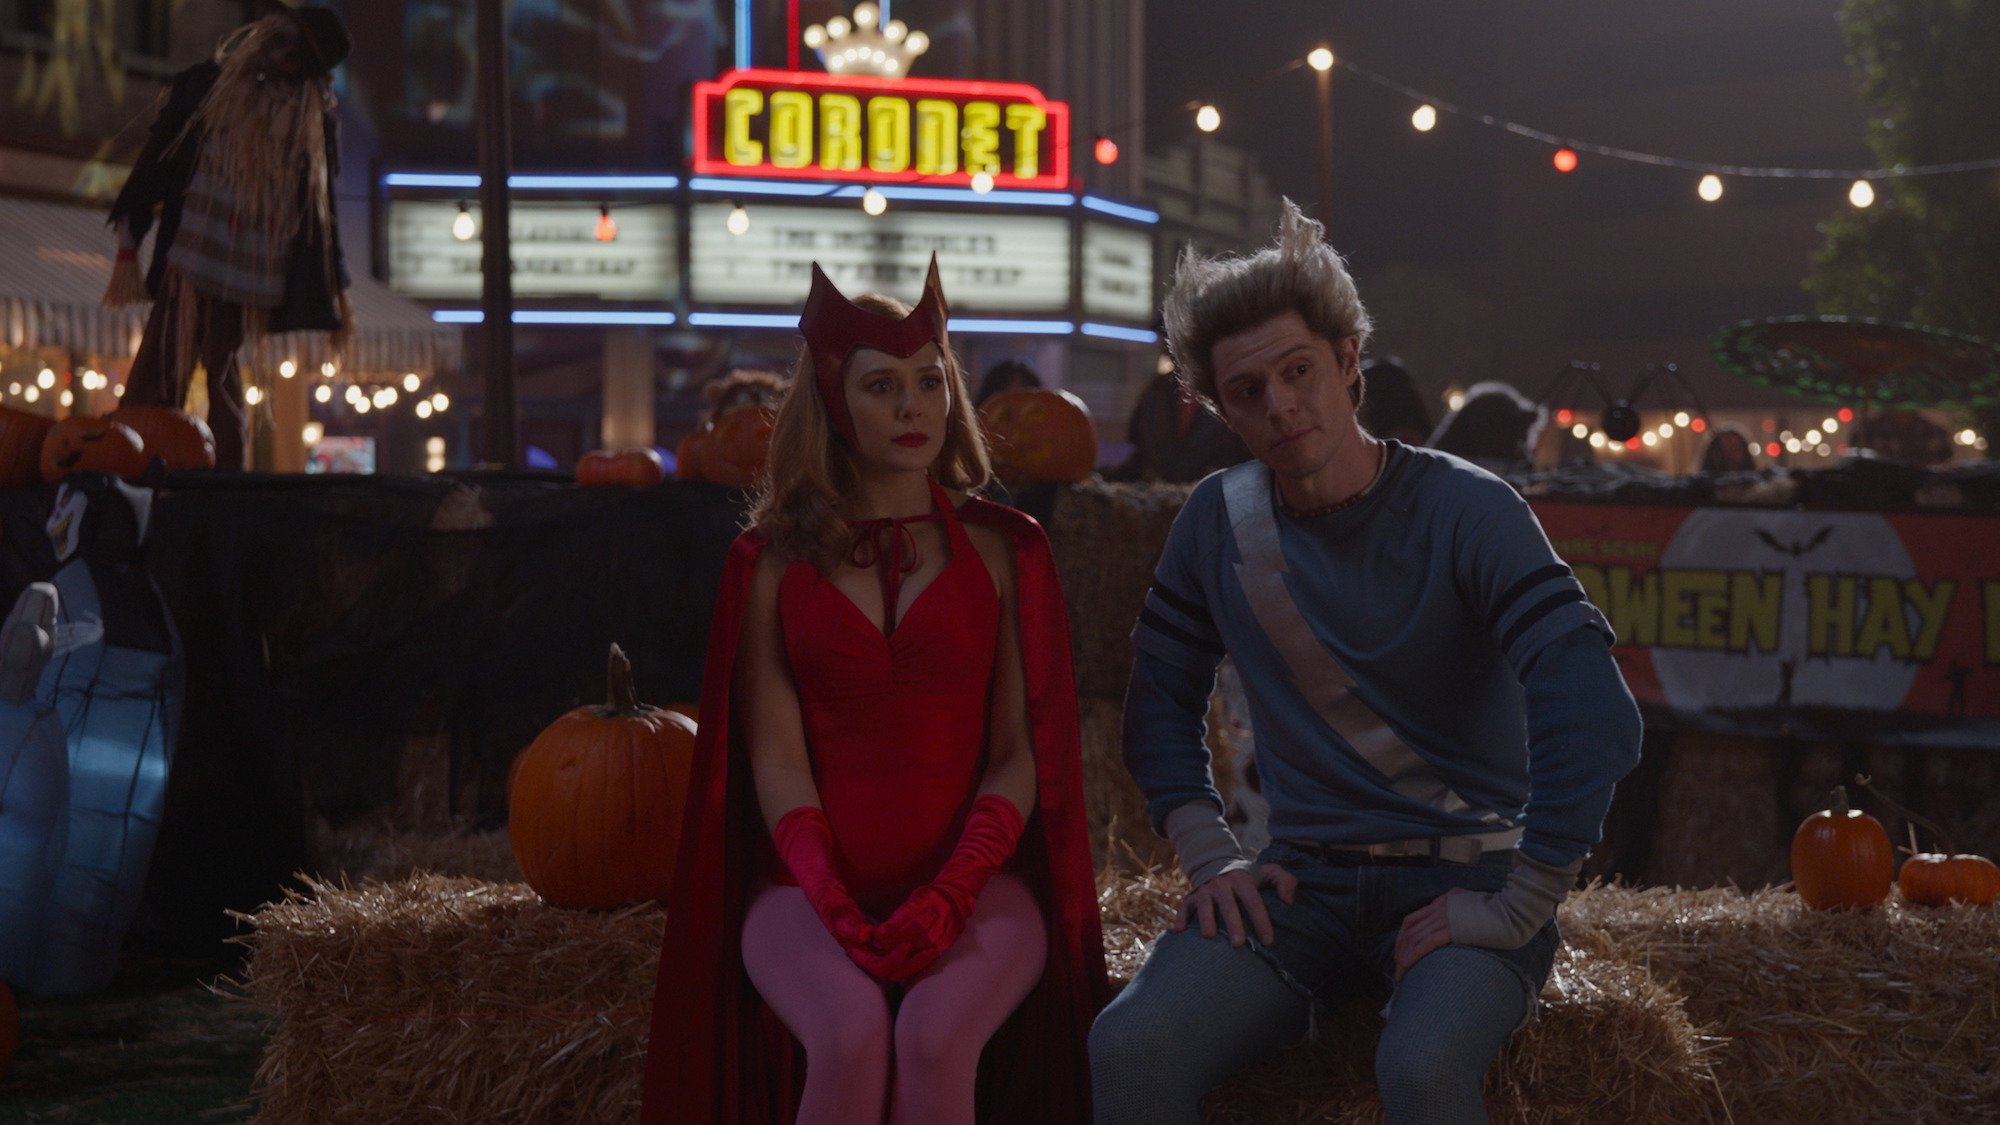 Elizabeth Olsen as Wanda Maximoff and Evan Peters as Pietro Maximoff (maybe) in the Halloween episode of 'WandaVision'